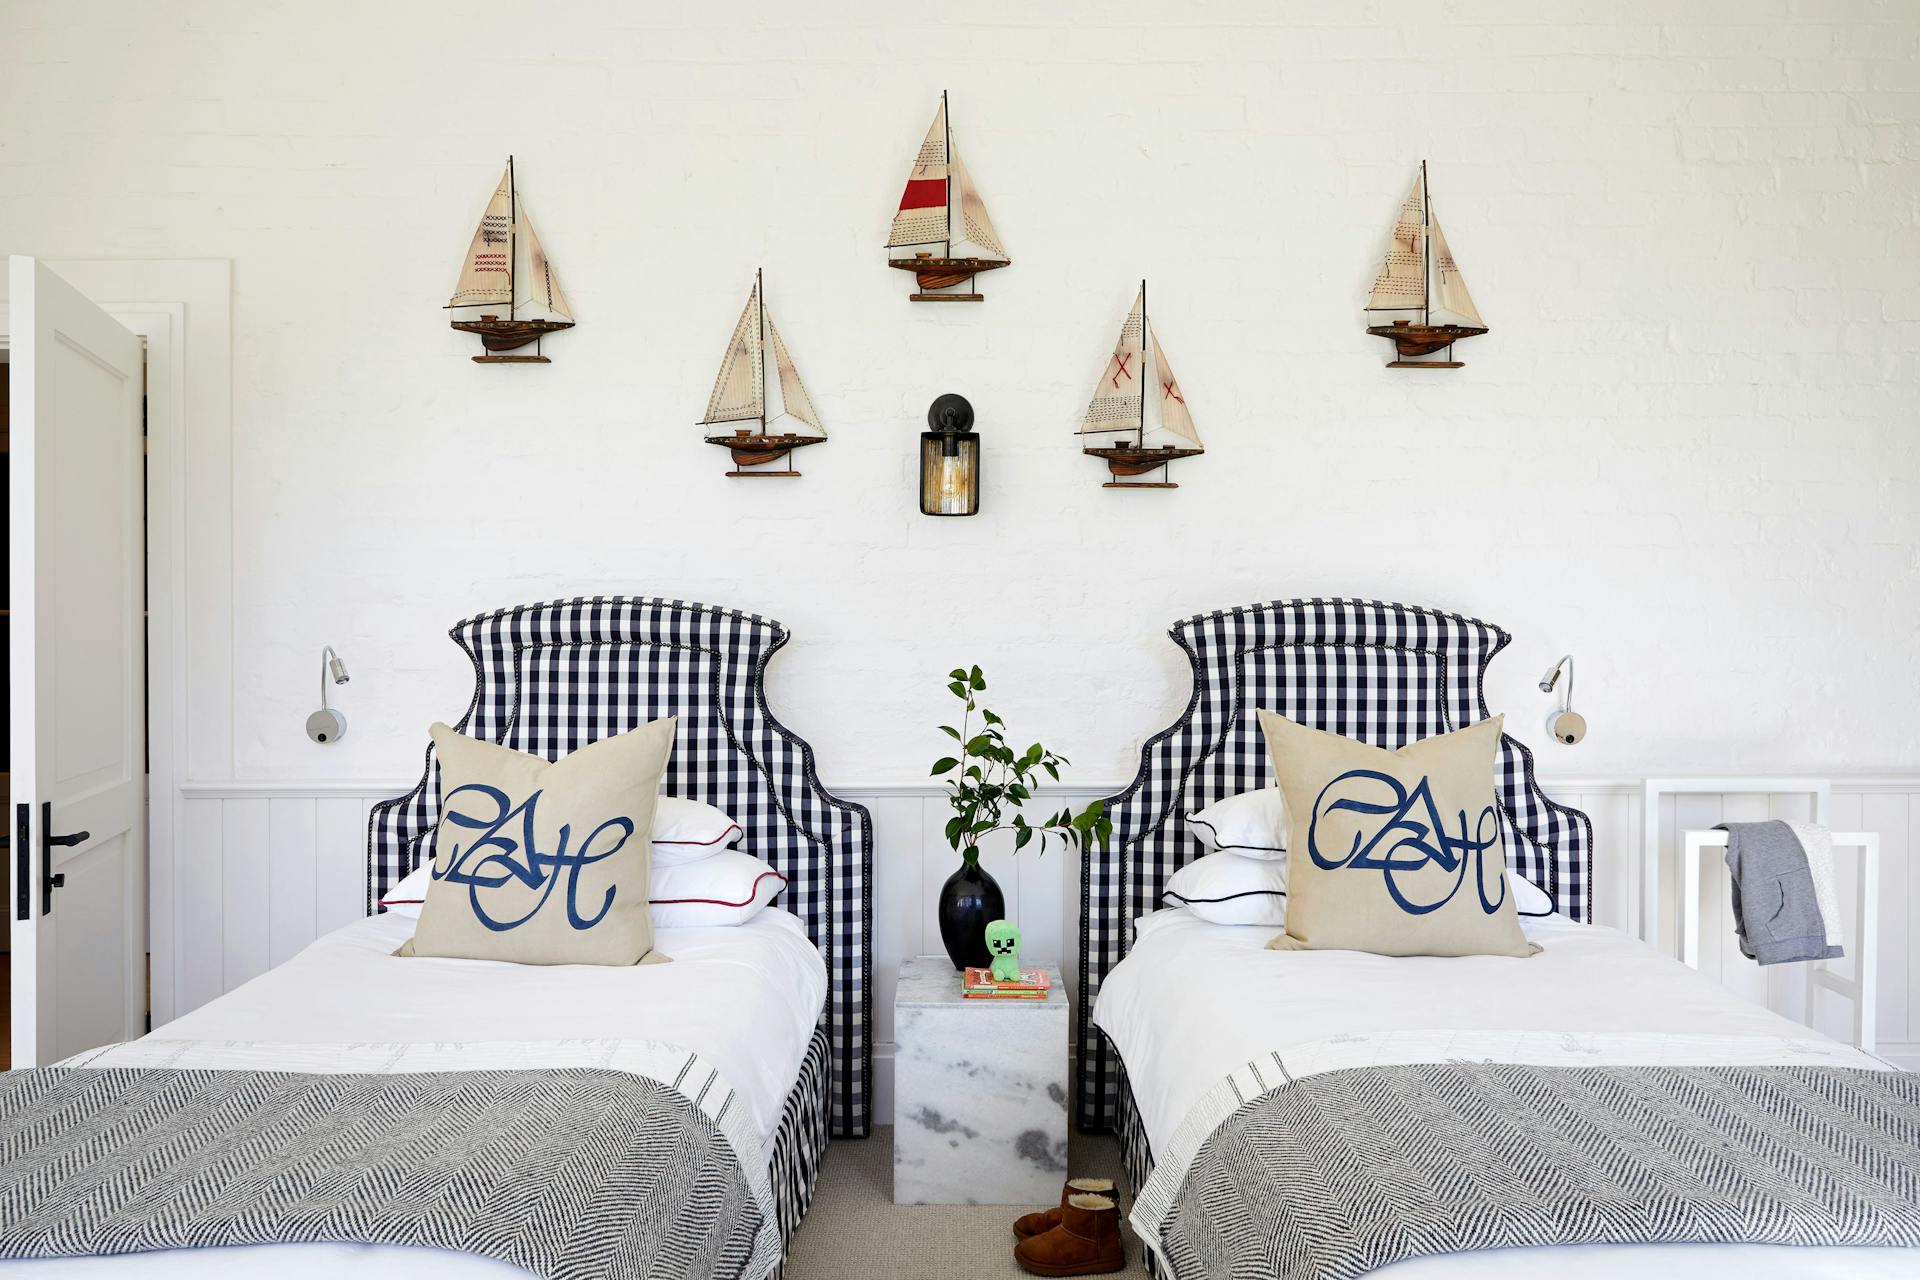 A marine-inspired bedroom with two single beds that both feature blue and white checkered headboards. Artwork of ships hang on the wall with a side table in between the beds.